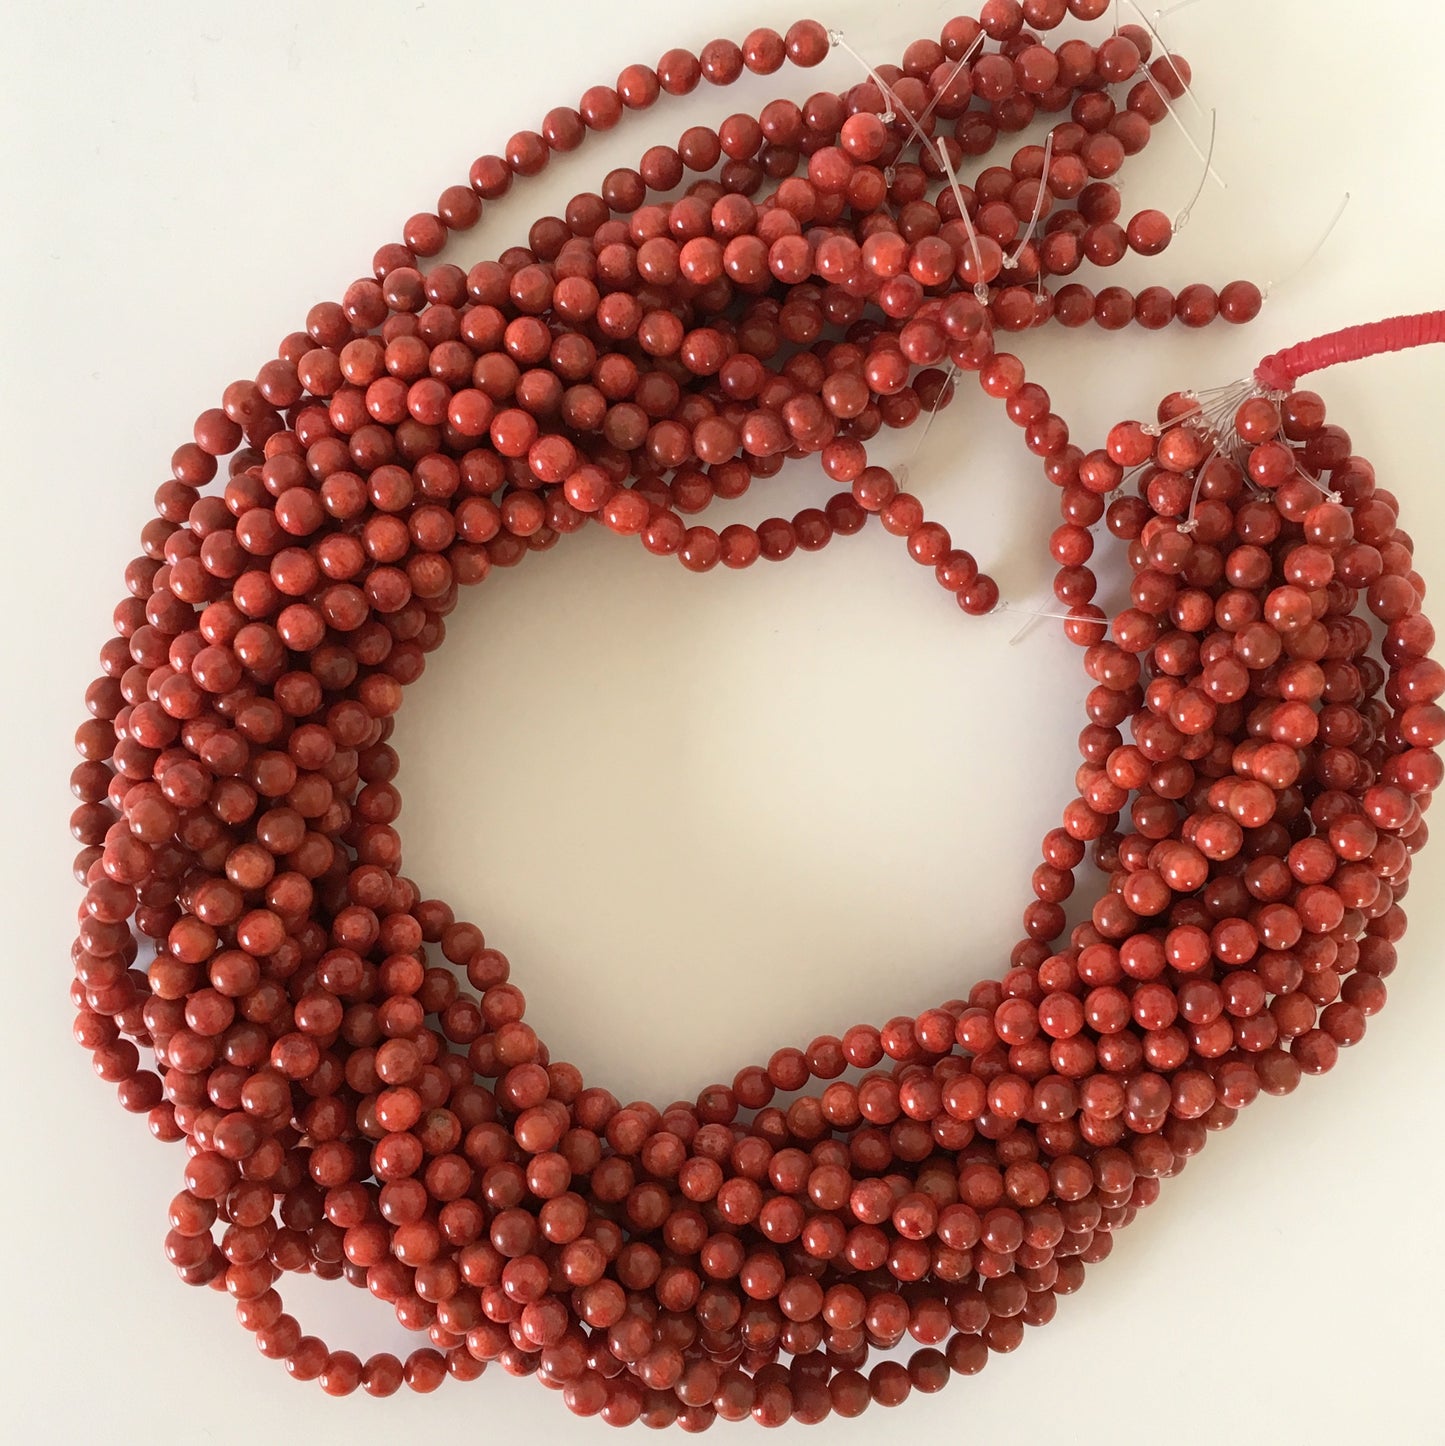 a string of red beads on a white surface